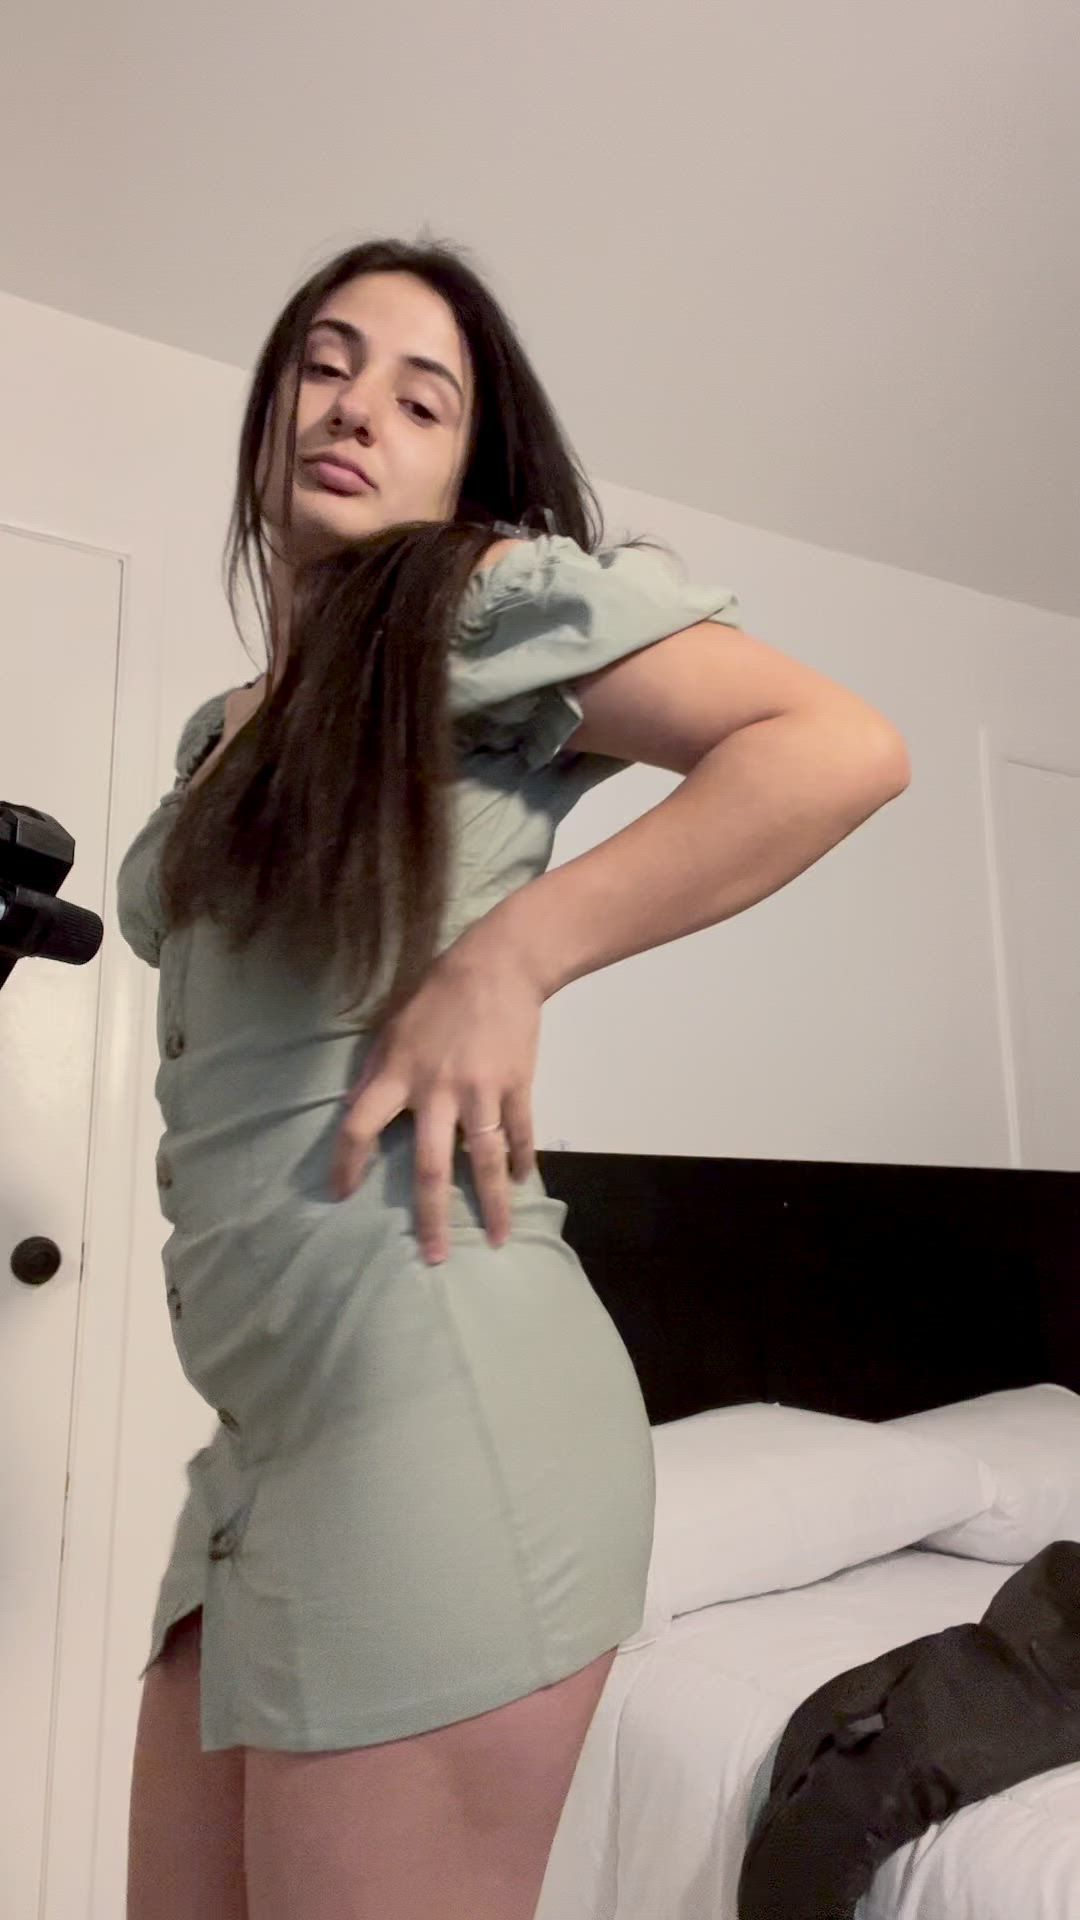 Teen porn video with onlyfans model xmilagrox <strong>@xmilagrox</strong>